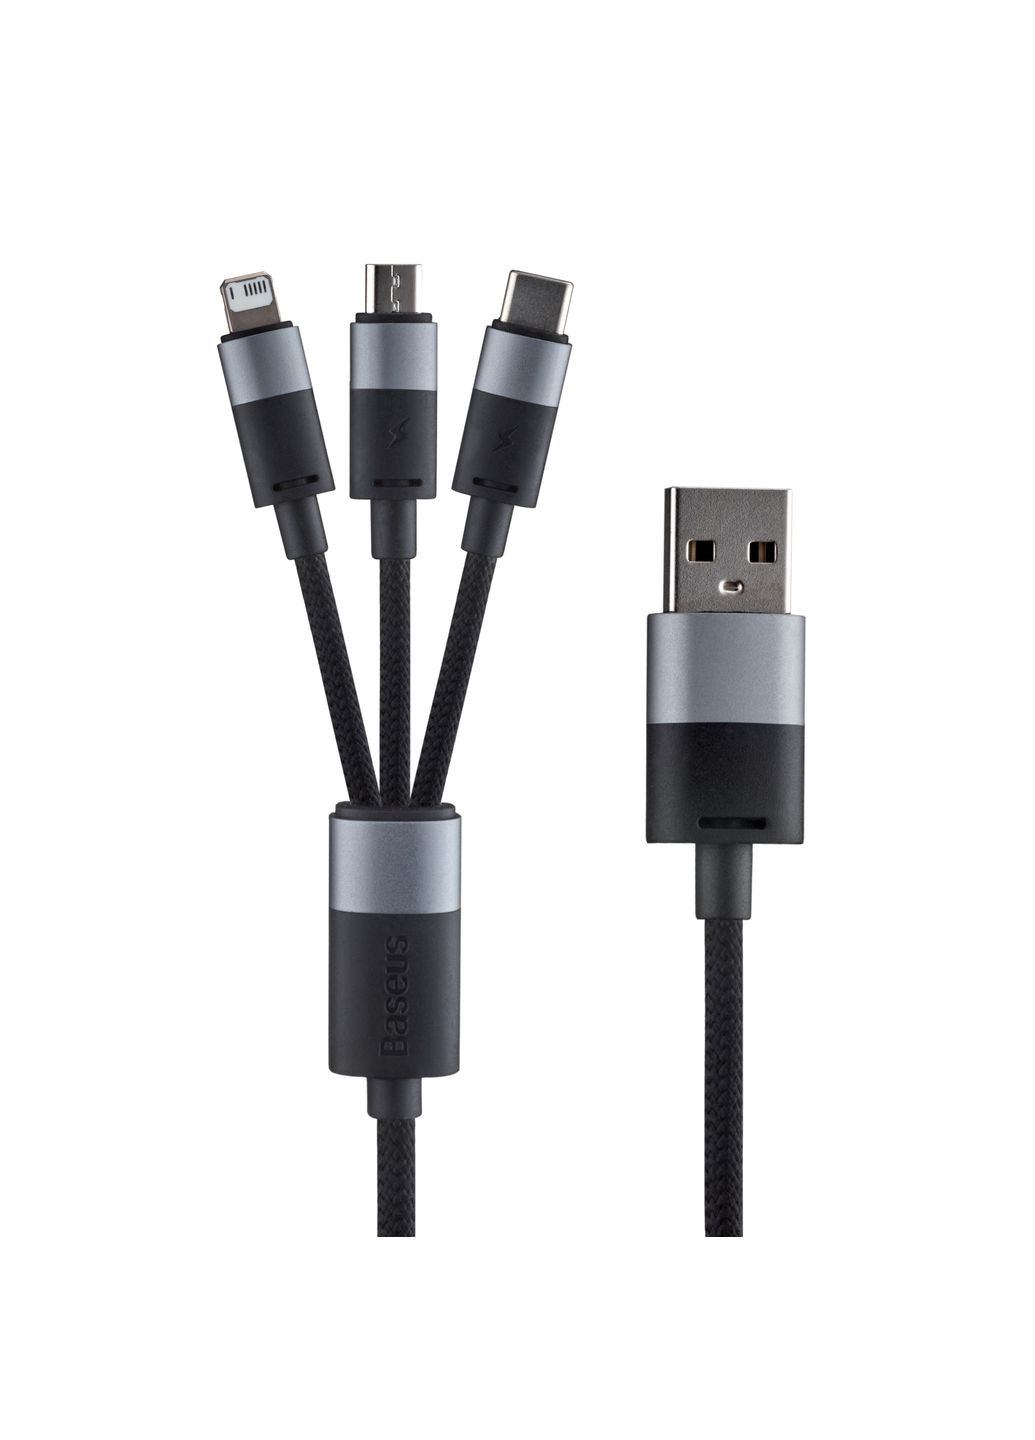 Кабель StarSpeed 1for-3 Fast Charging Data Cable USB to M+L+C 3.5A 1.2m Black Baseus (297456484)